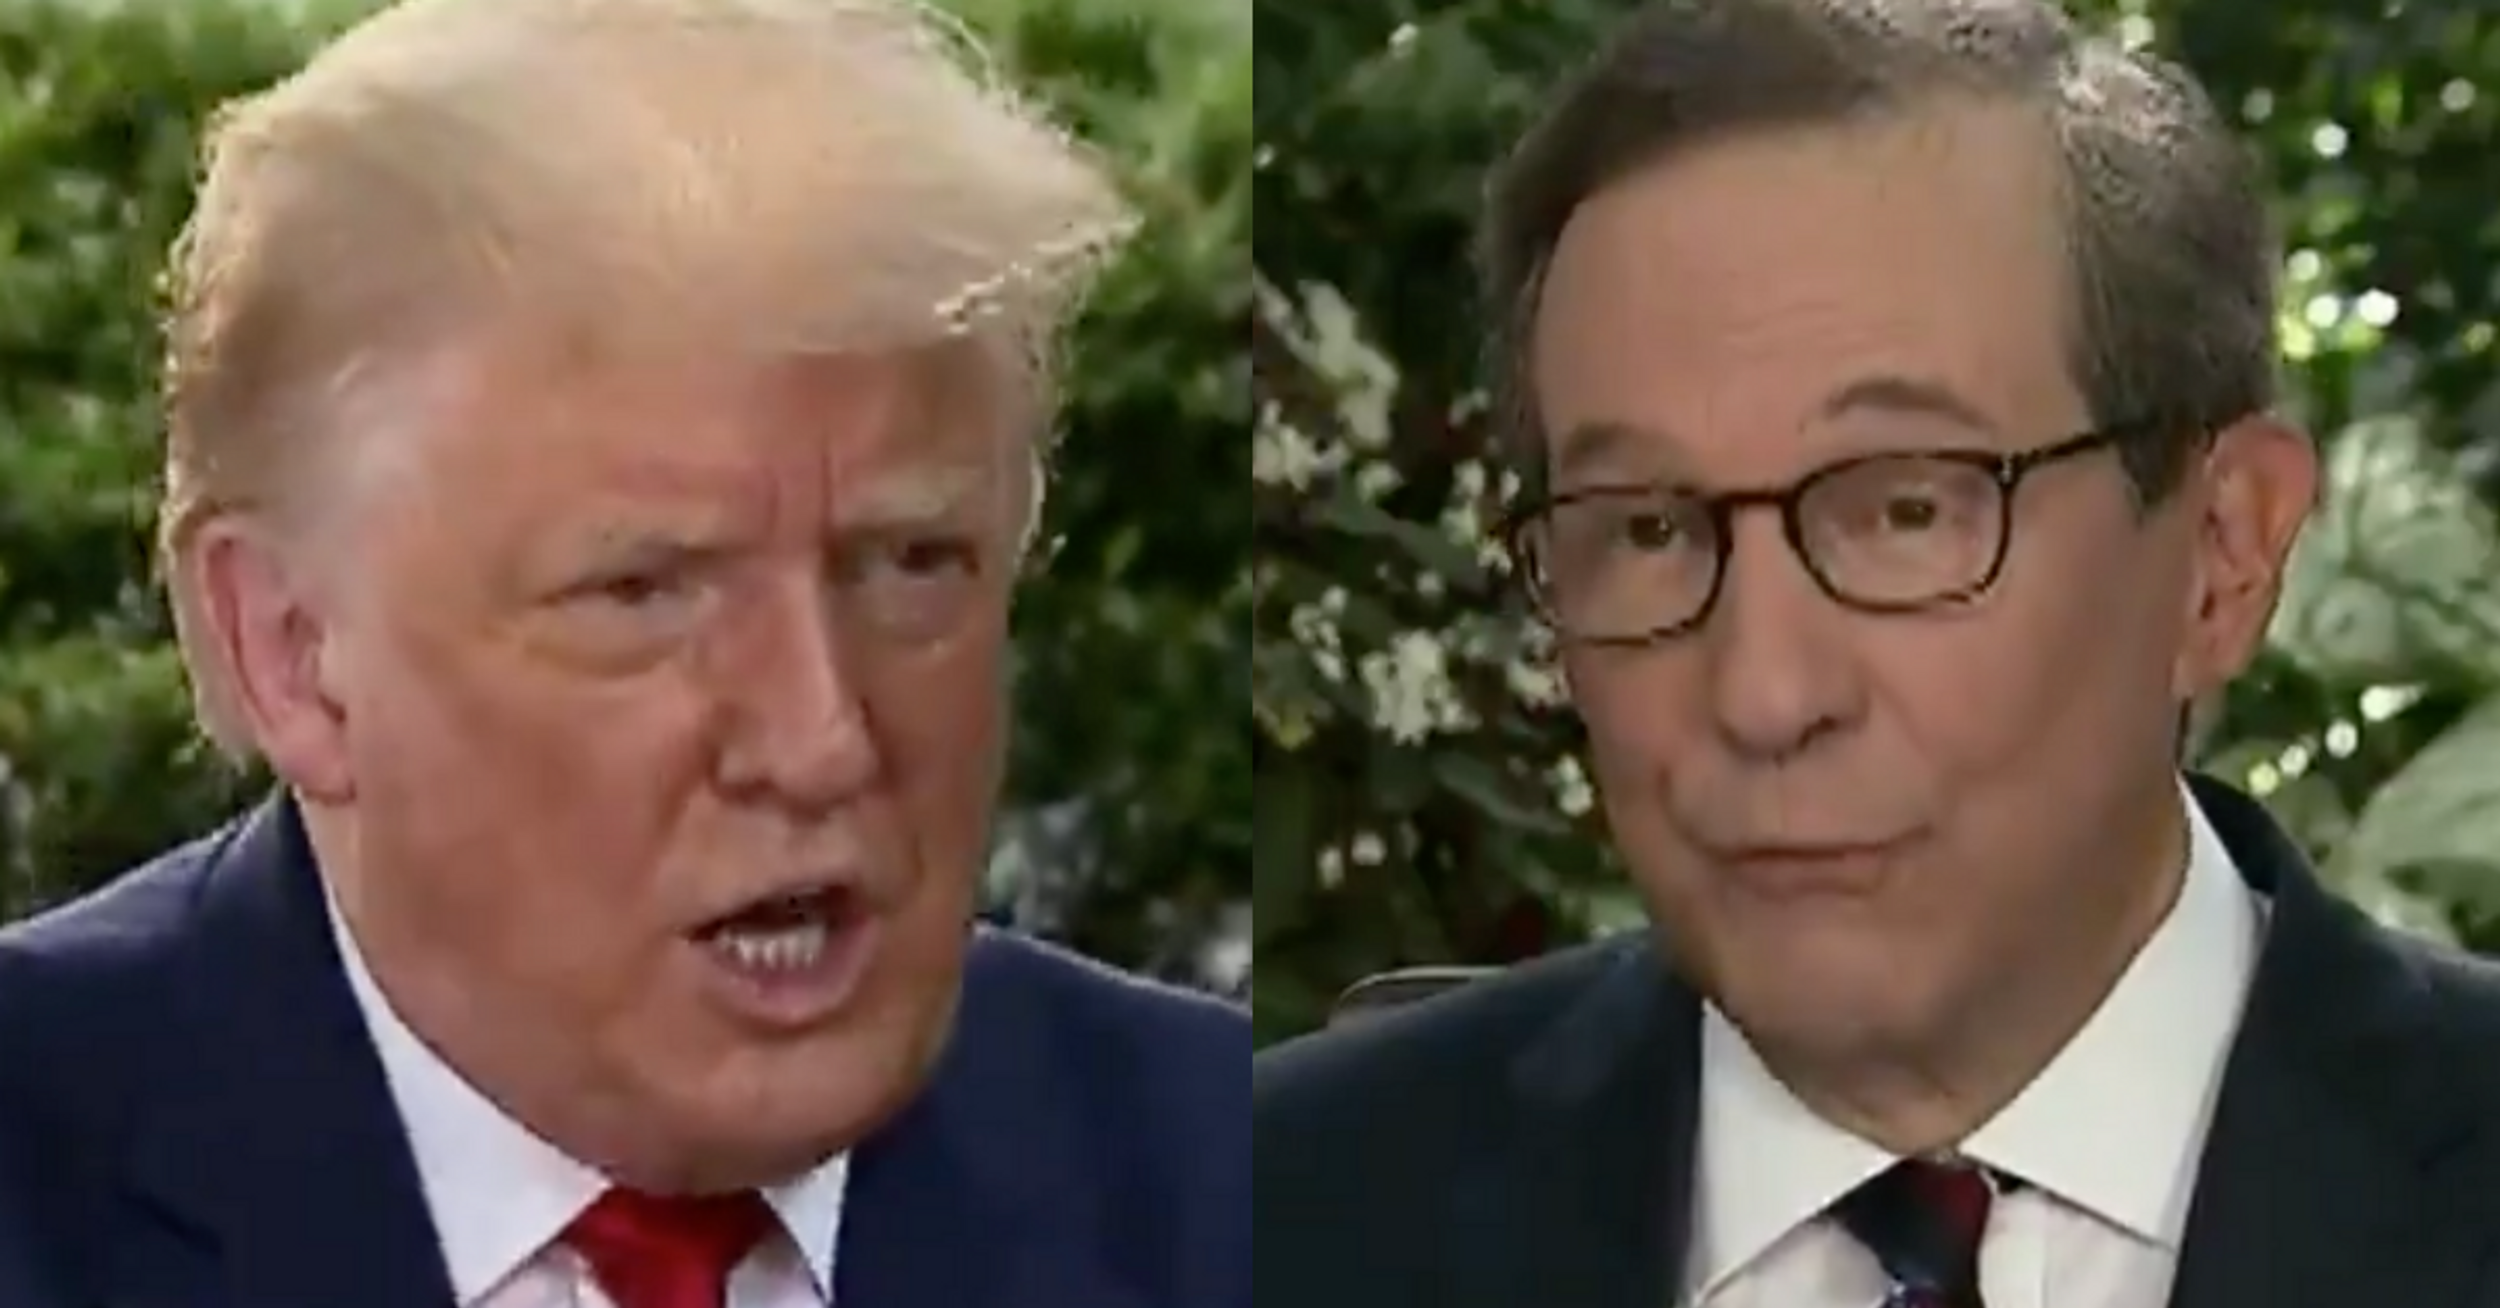 Trump Tried to Fact-Check Chris Wallace Over Biden's Position on Police Funding and It Backfired Immediately